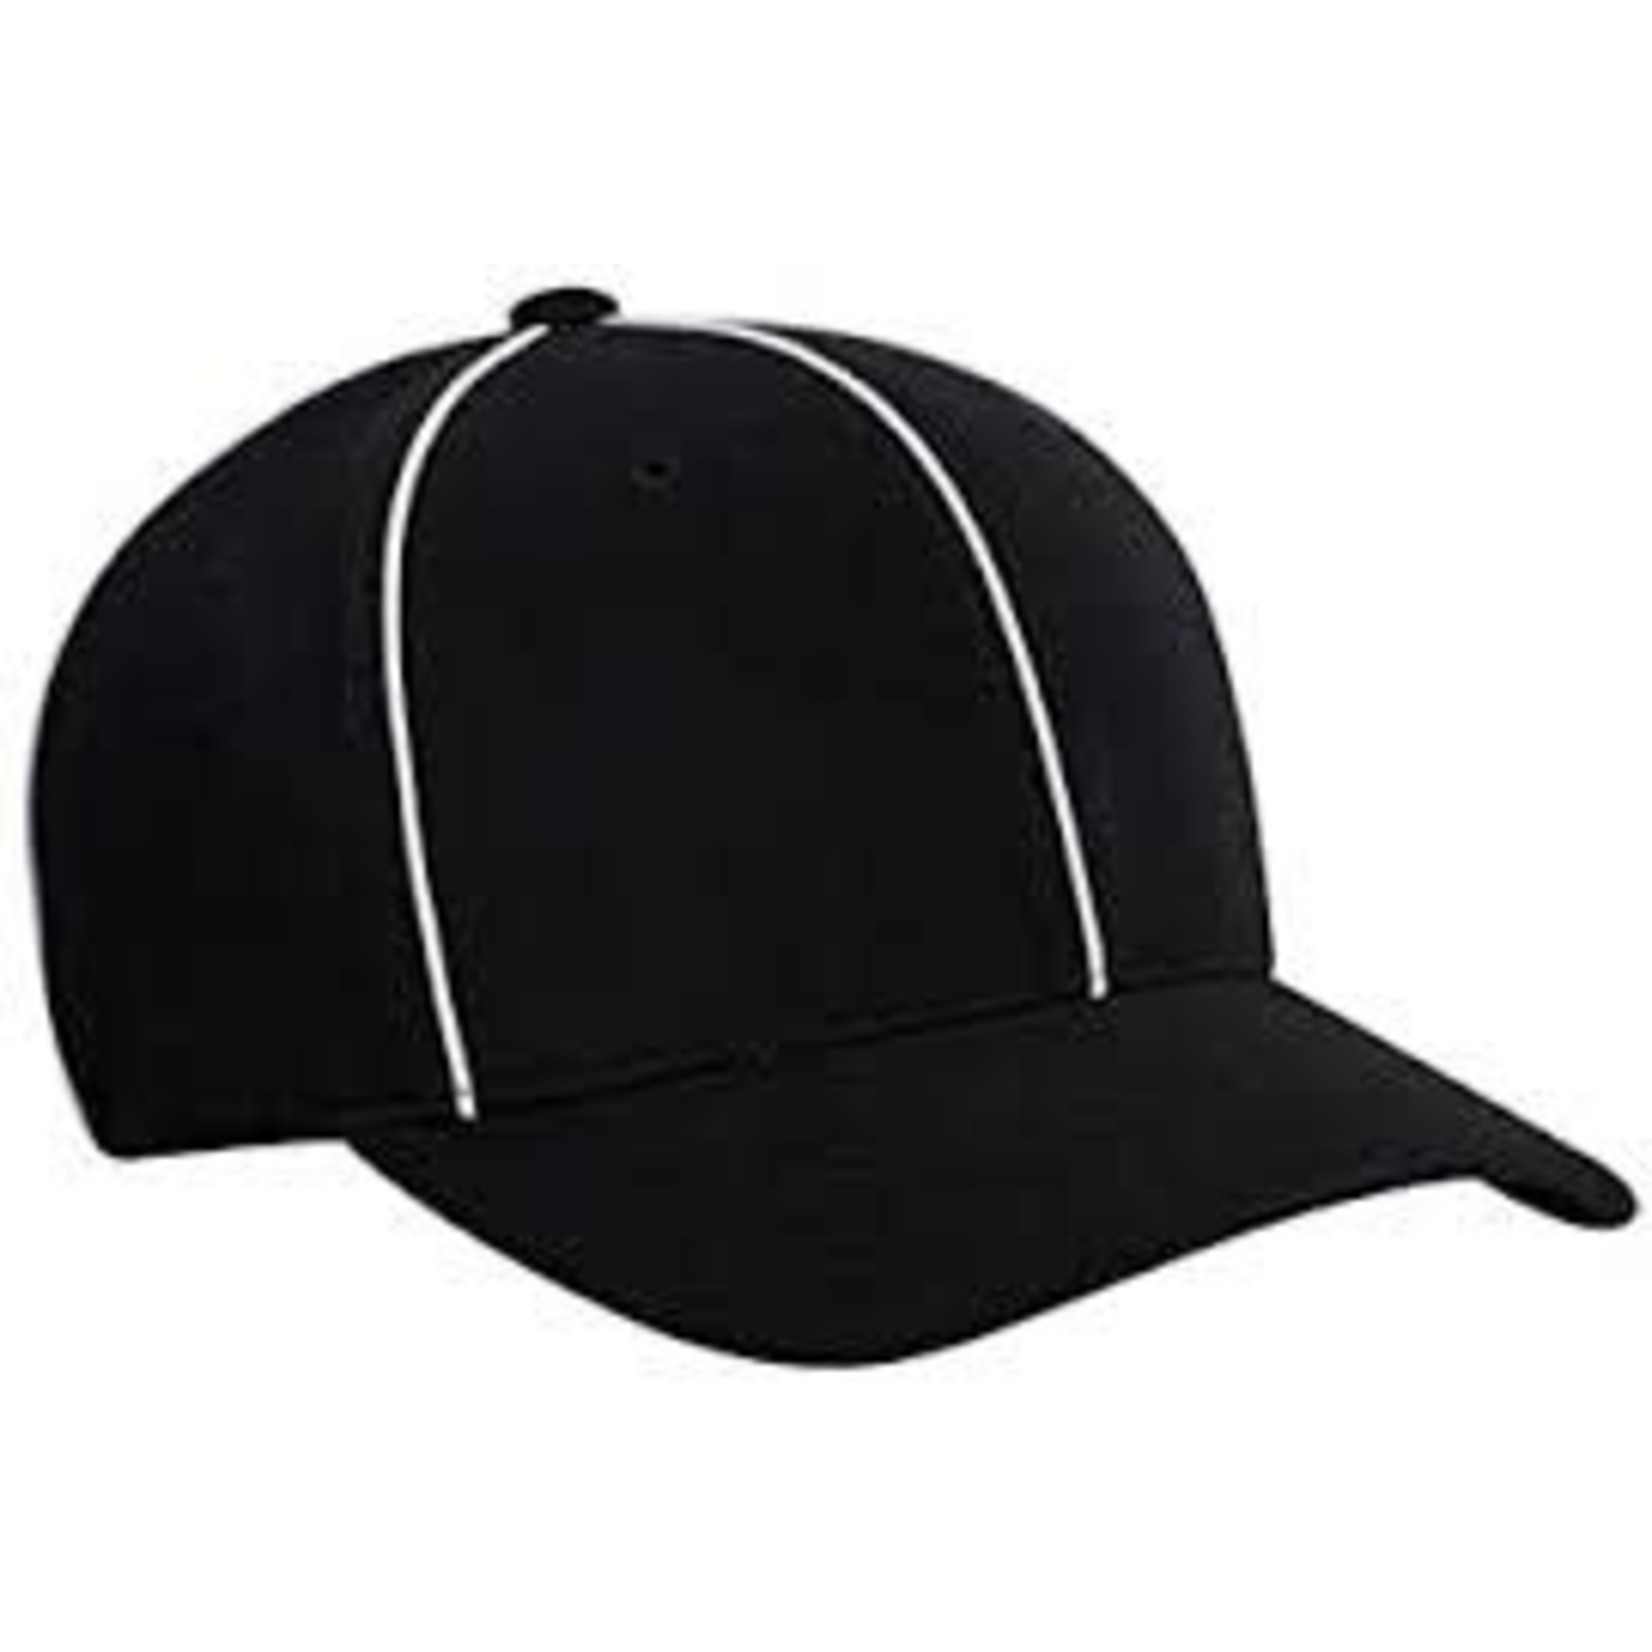 Smitty Smitty Low Profile Official’s Hat Black/White